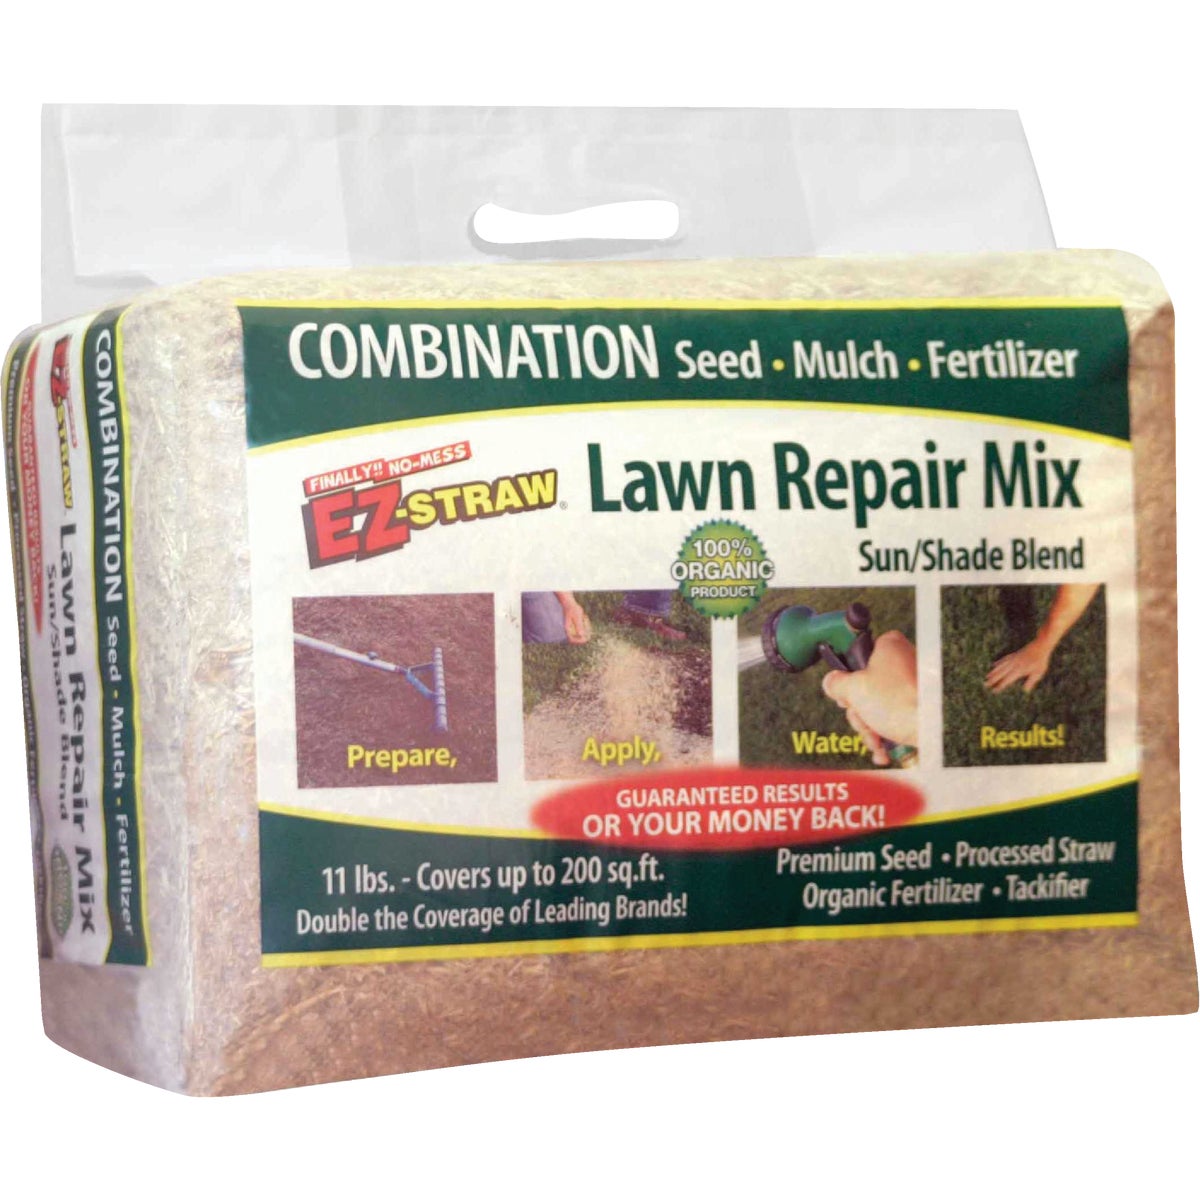 Item 763913, Lawn repair mix with a combination of seed, processed straw mulch, 